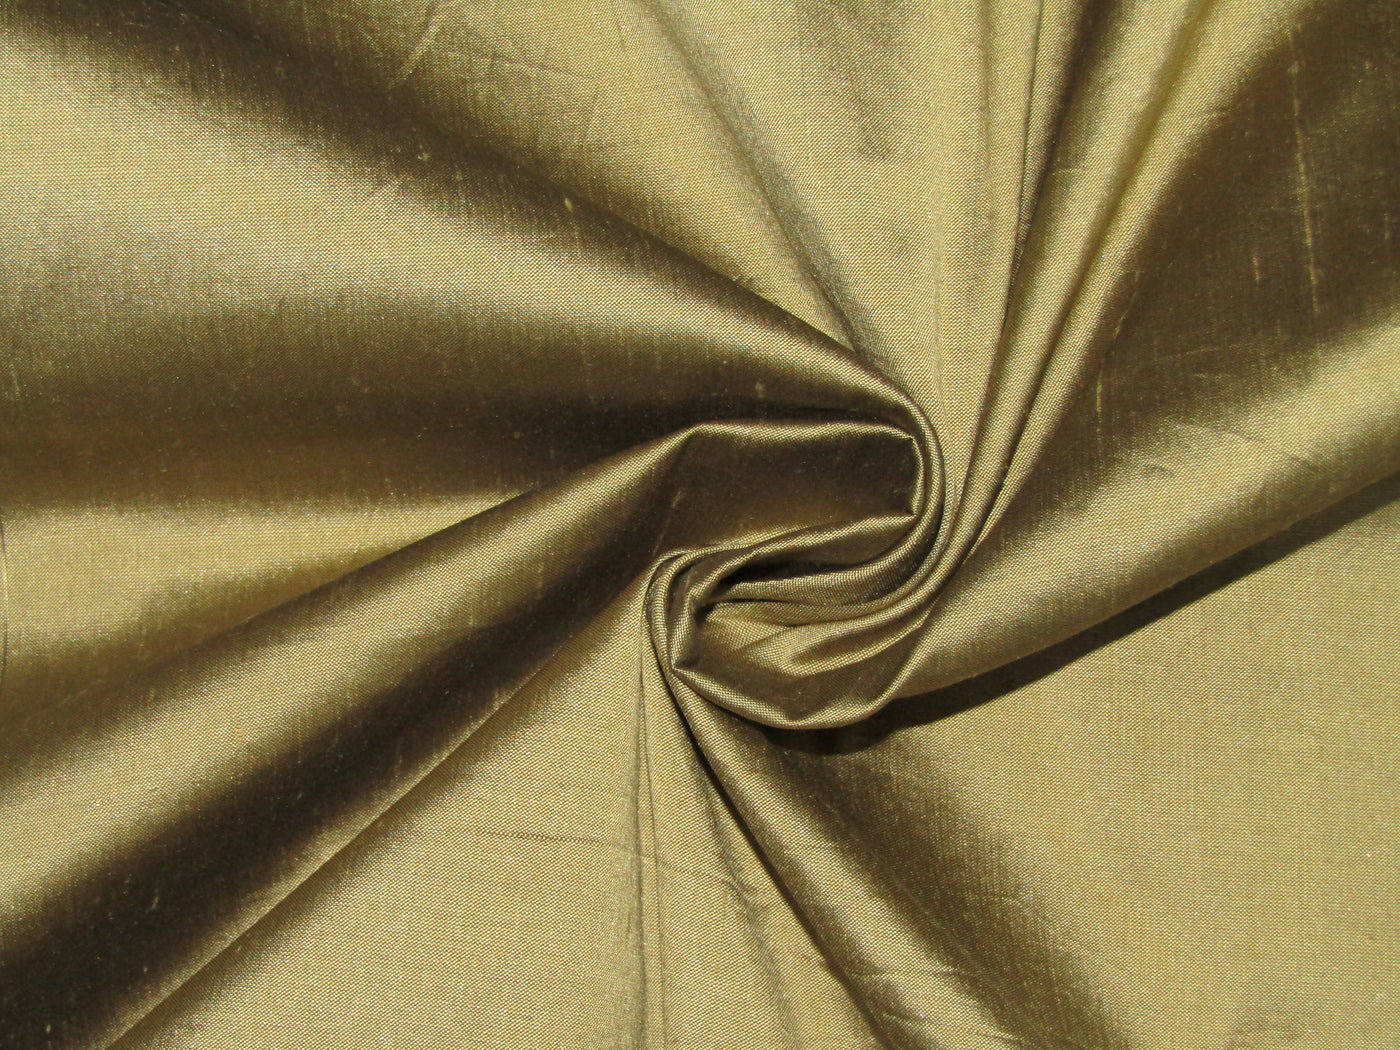 100% PURE SILK DUPIONI FABRIC GREENY GOLD X BLACK color 54" wide DUP92[1]/ DUP92[2]